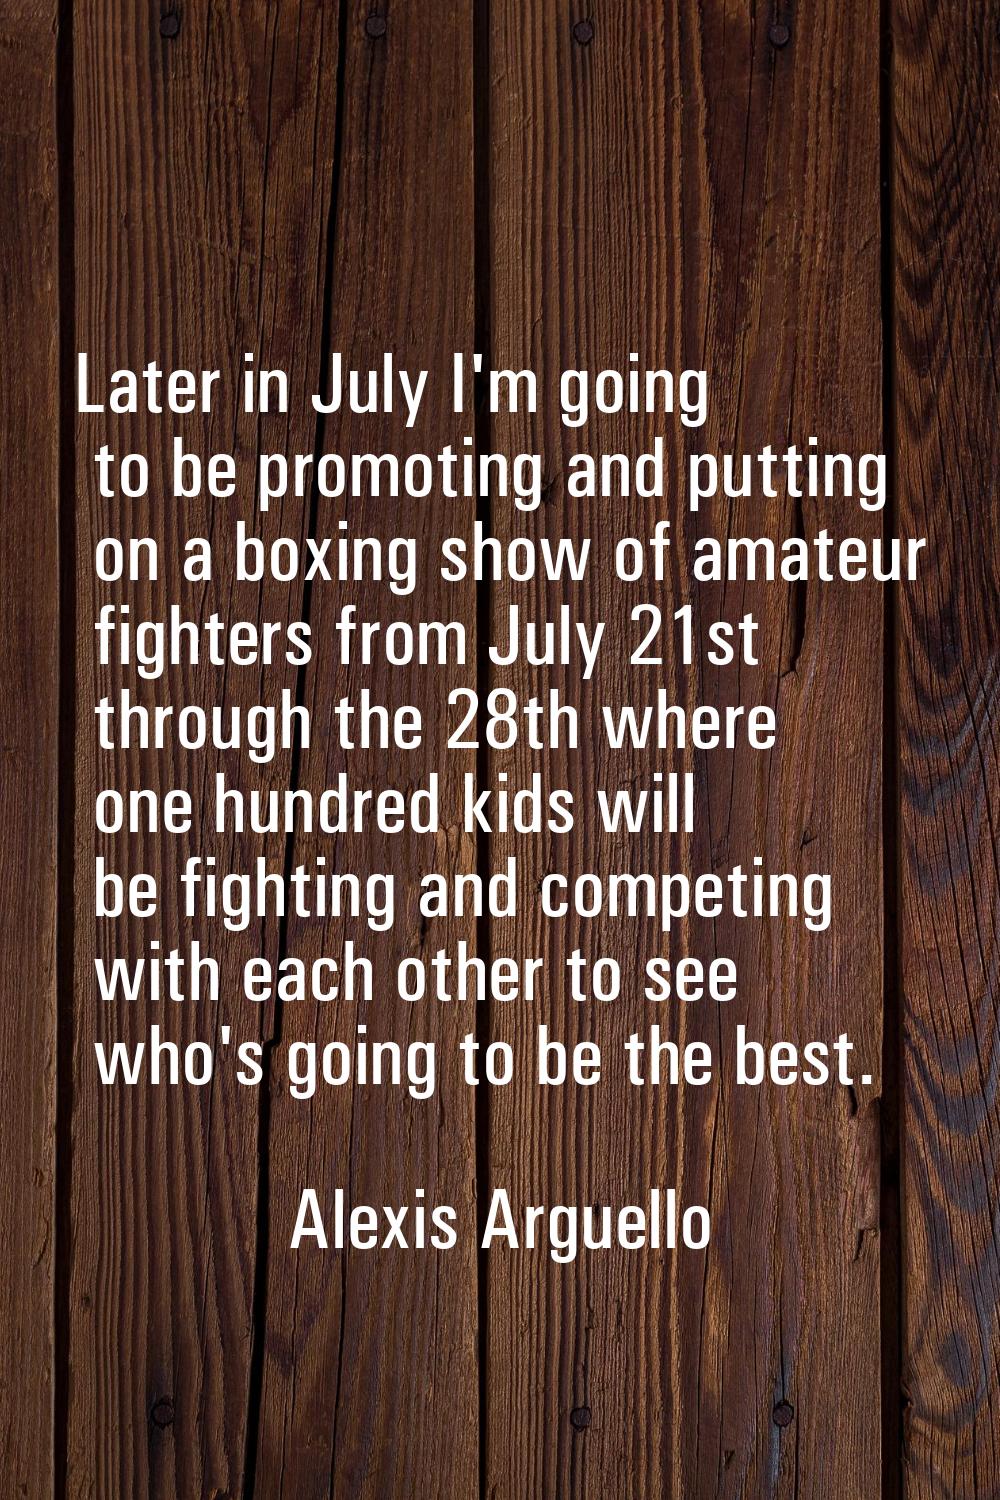 Later in July I'm going to be promoting and putting on a boxing show of amateur fighters from July 